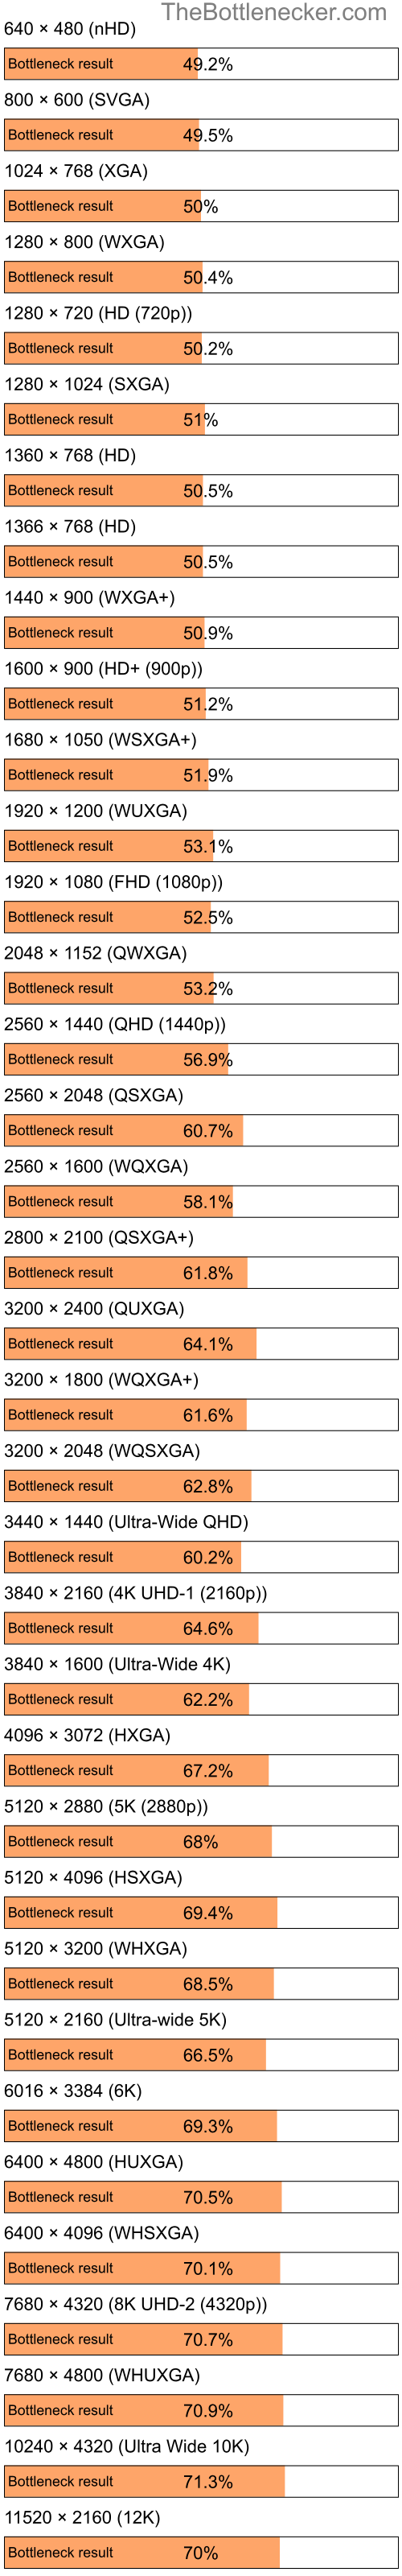 Bottleneck results by resolution for Intel Pentium 4 and NVIDIA GeForce 9400 in Processor Intense Tasks